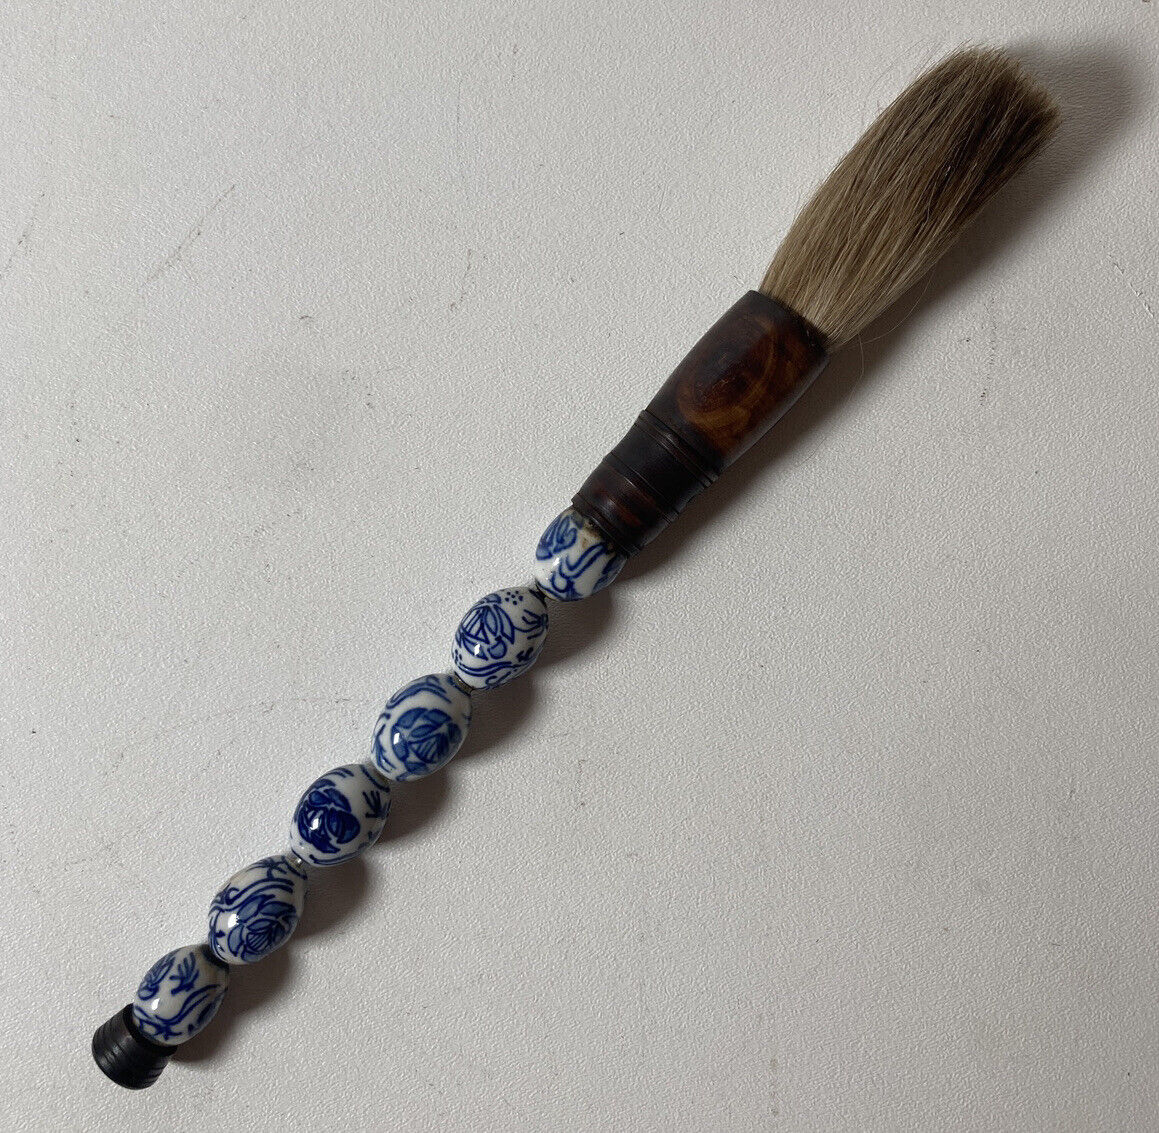 ANTIQUE VINTAGE CHINESE BLUE AND WHITE CERAMIC HANDLE CALLIGRAPHY INK BRUSH